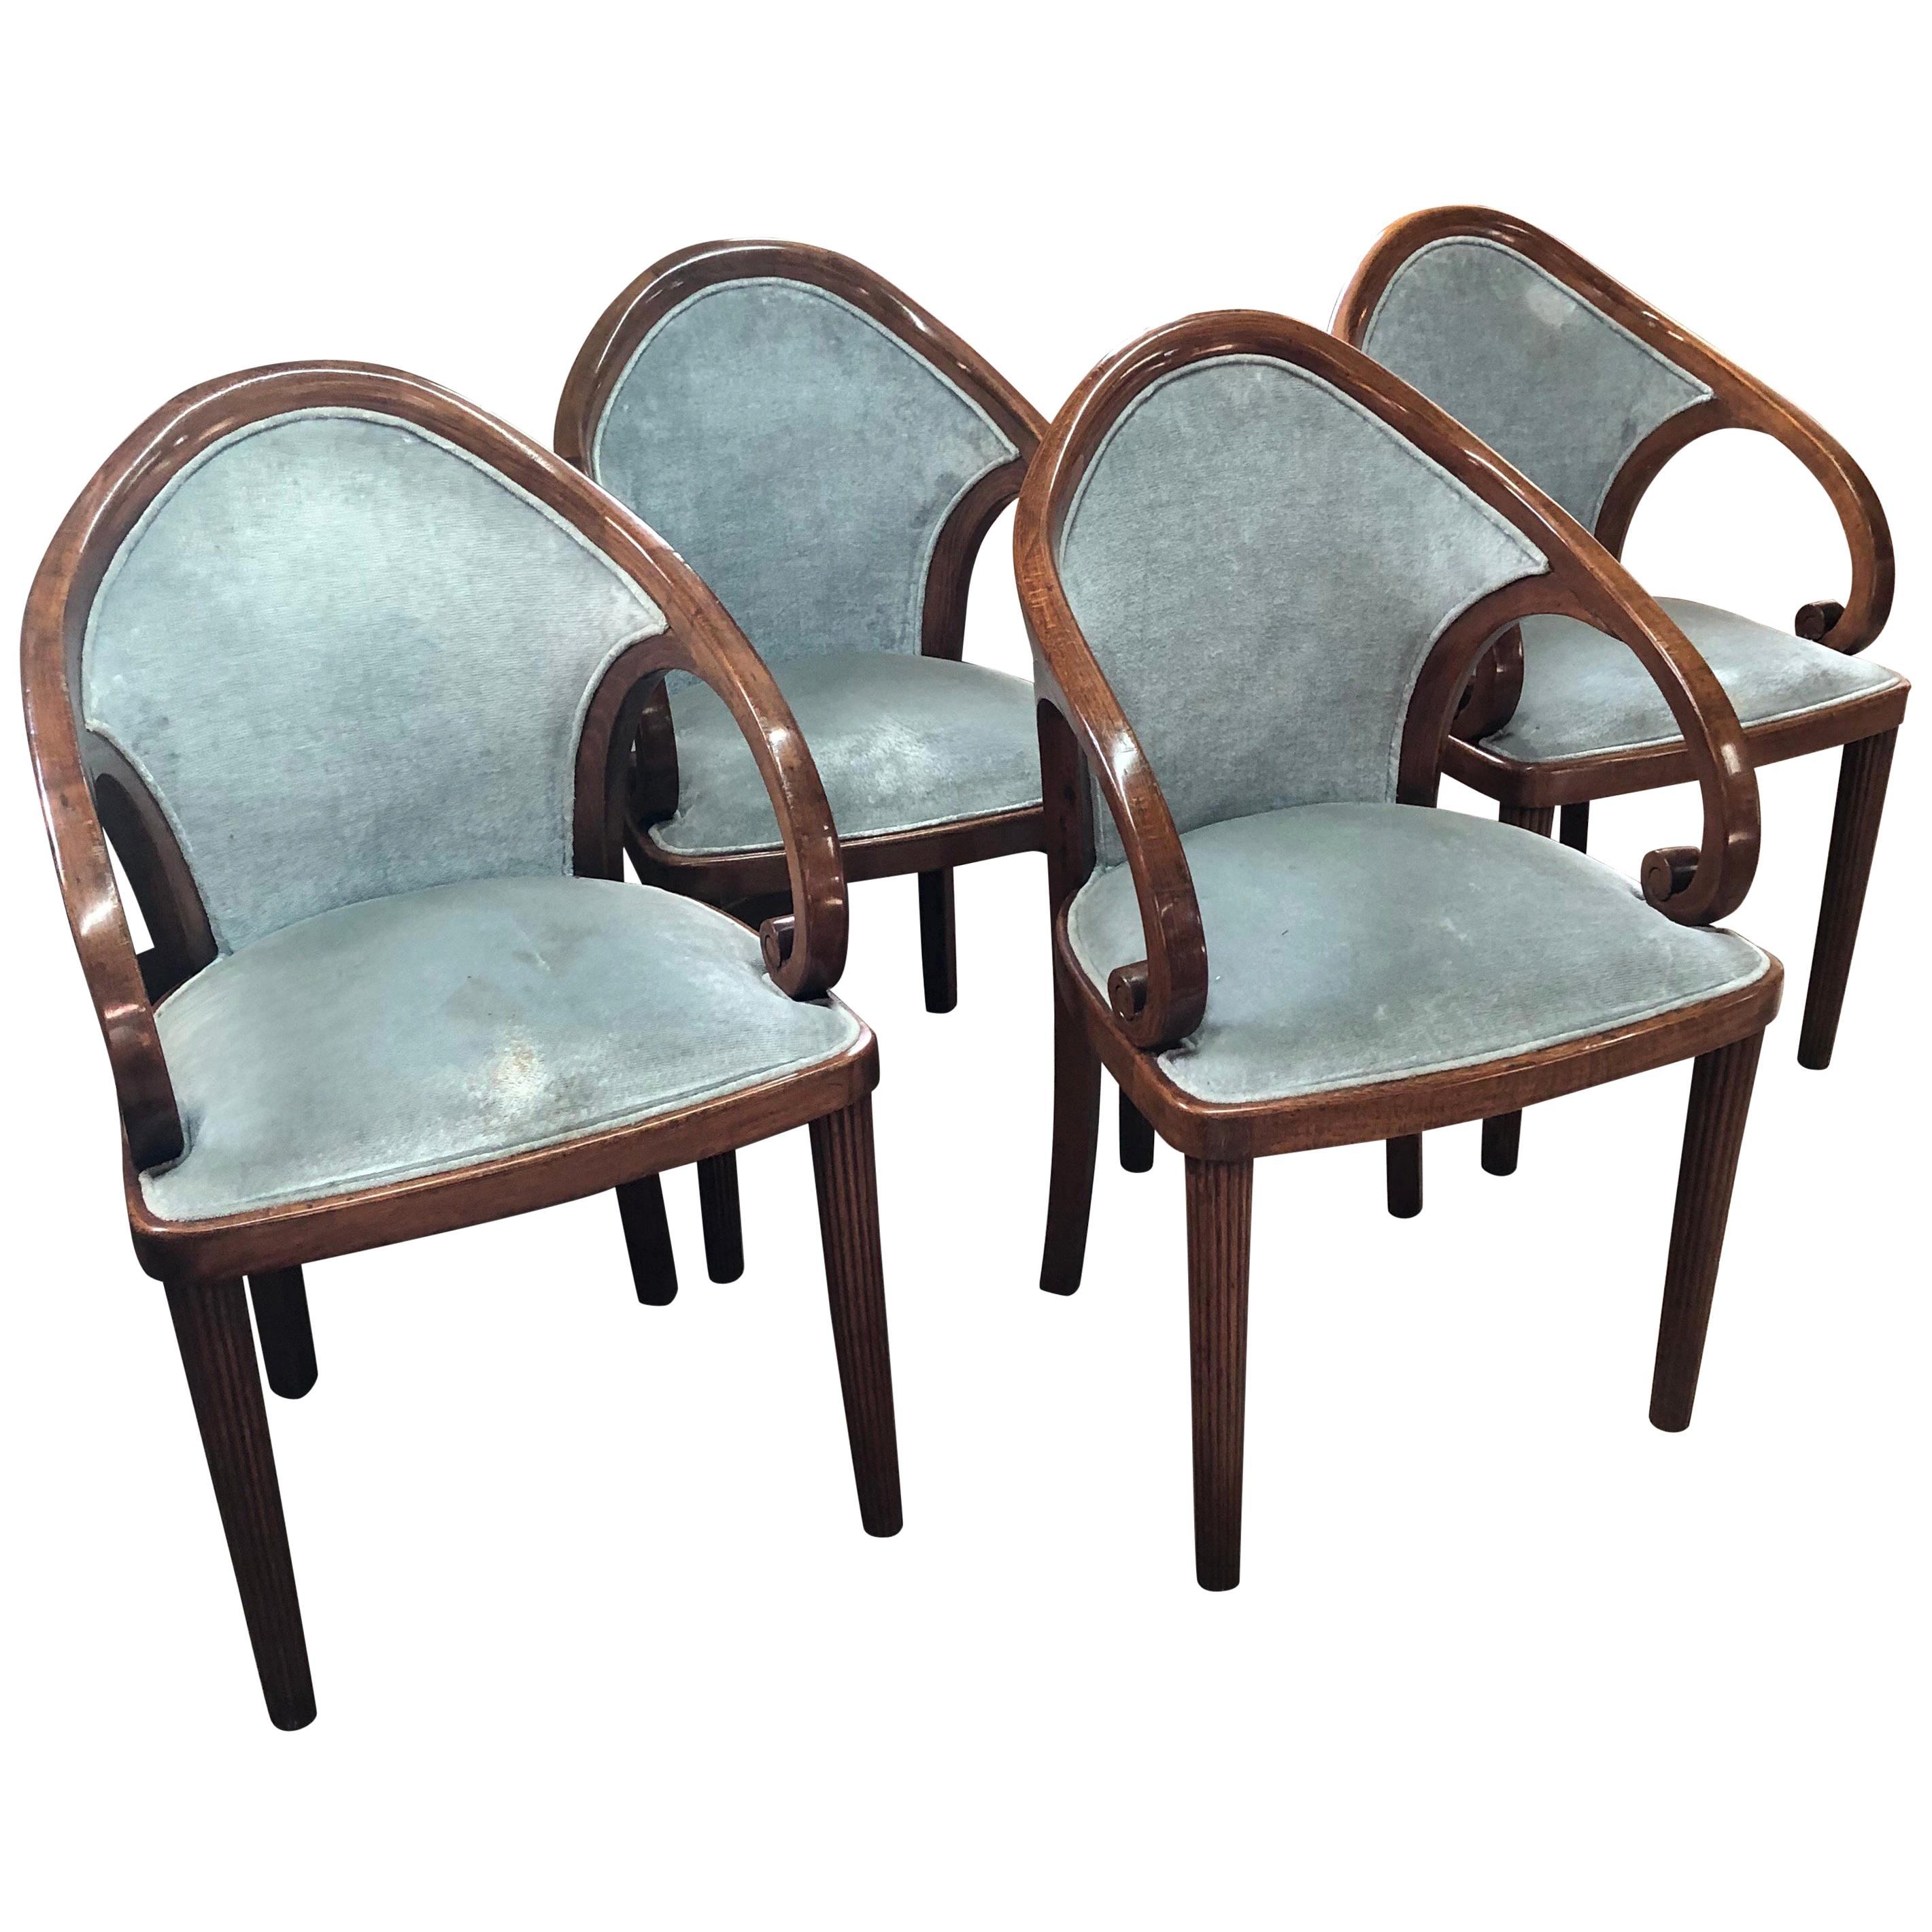 Set of Four Walnut Upholstered Dining Room Chairs